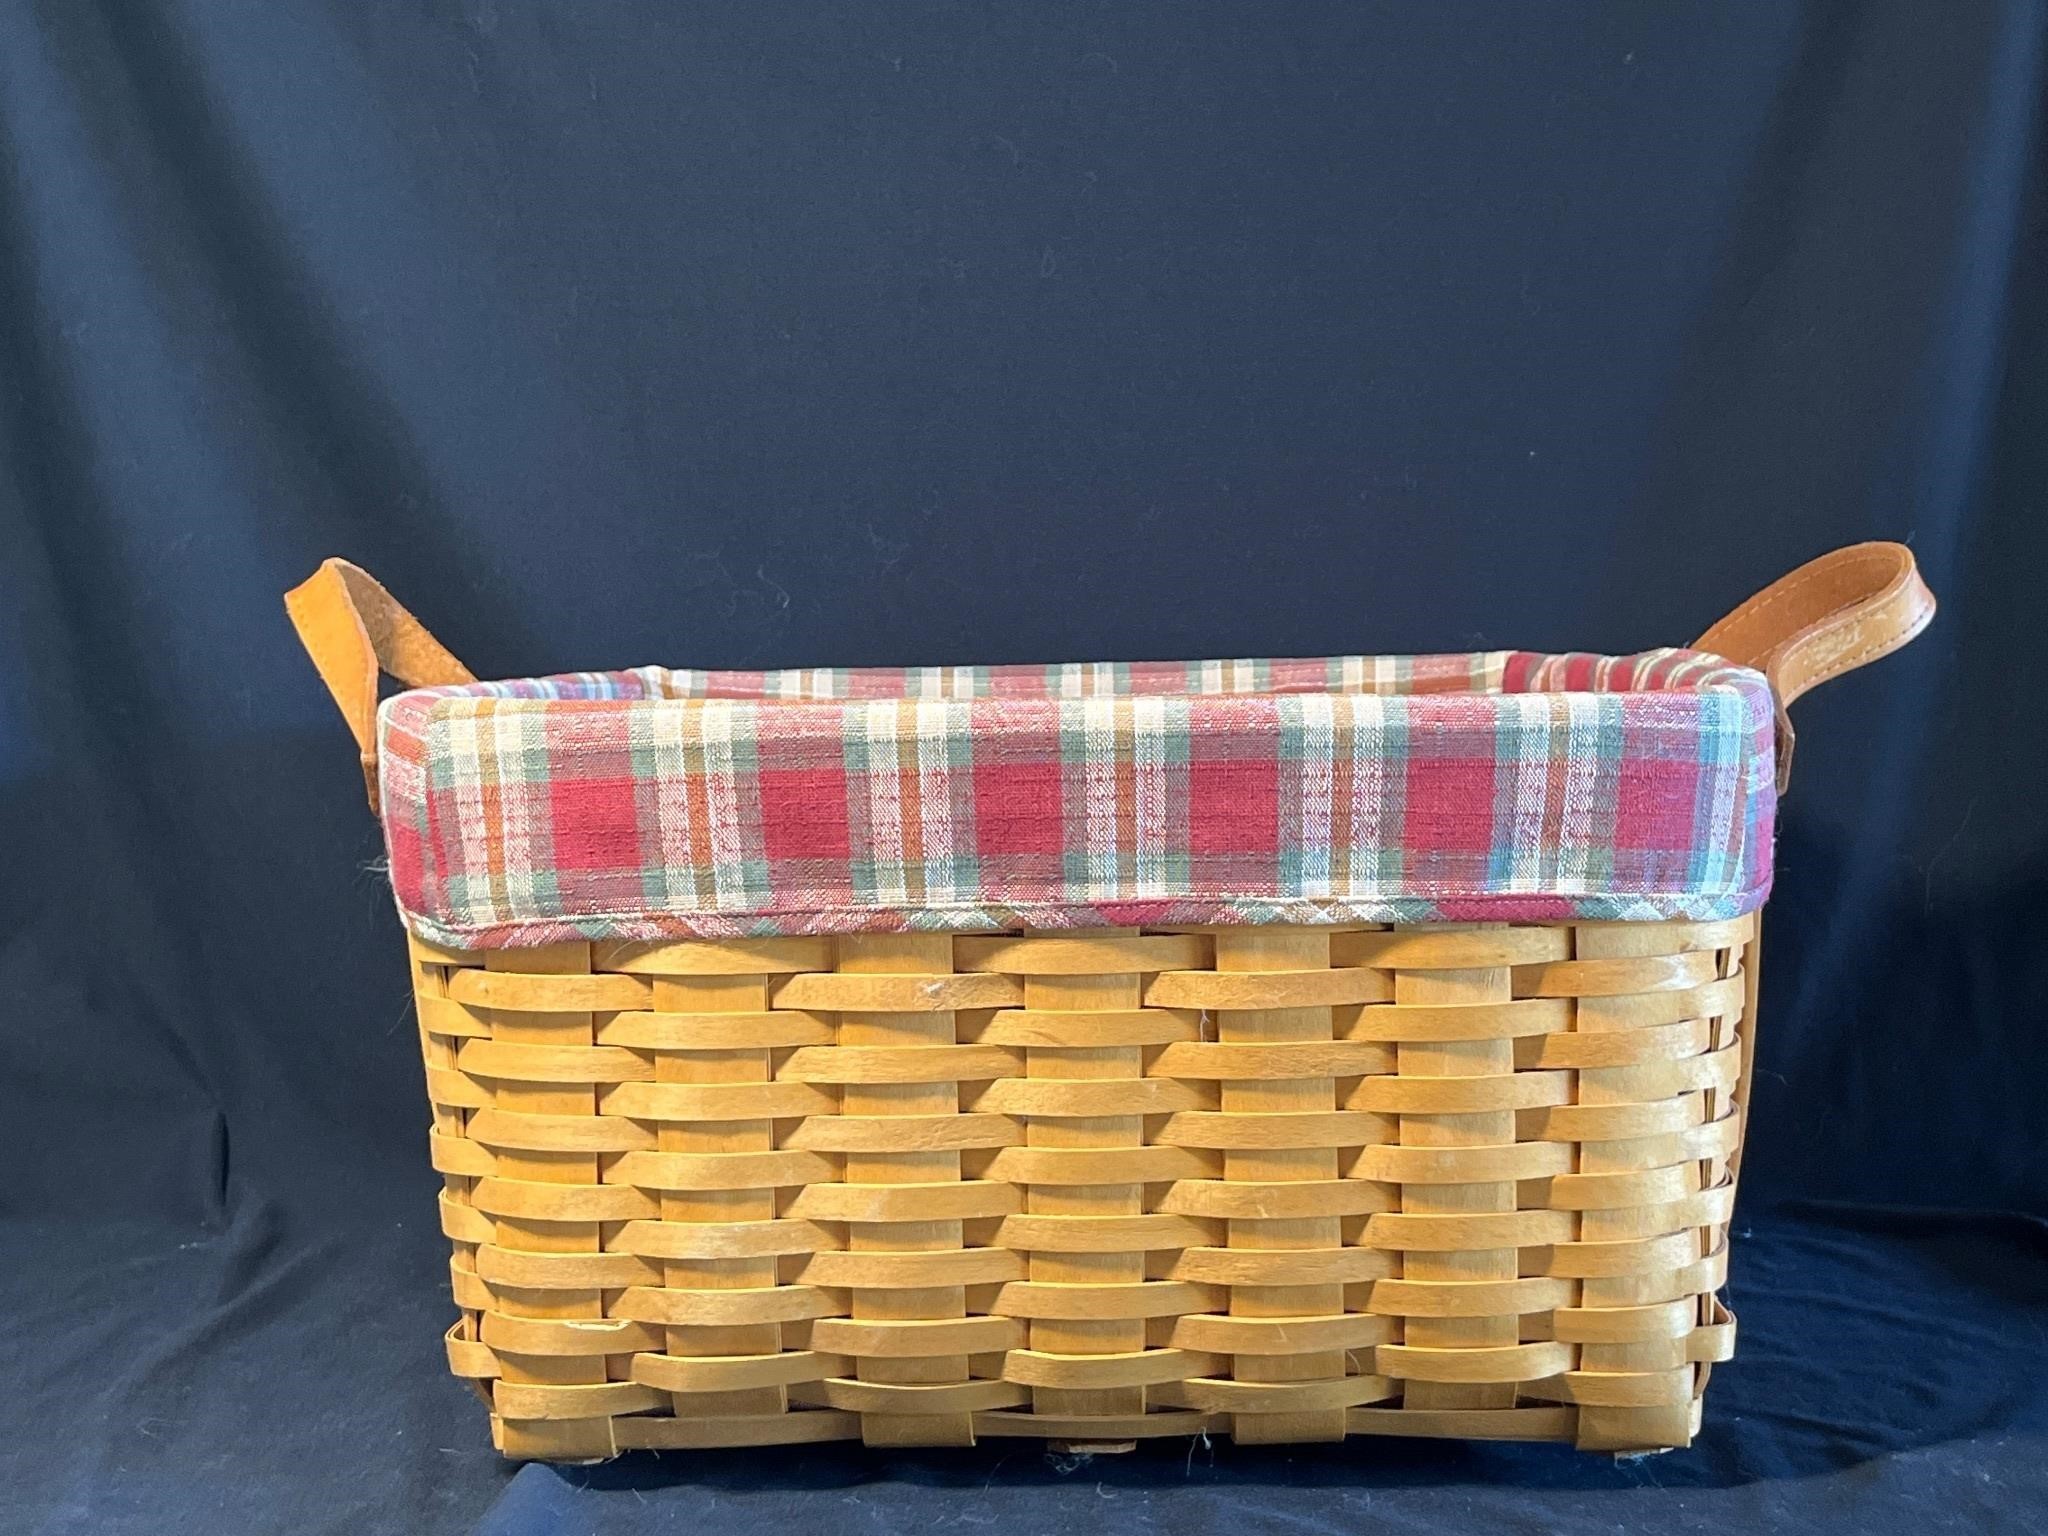 Longaberger Handwoven basket with fabric liner.